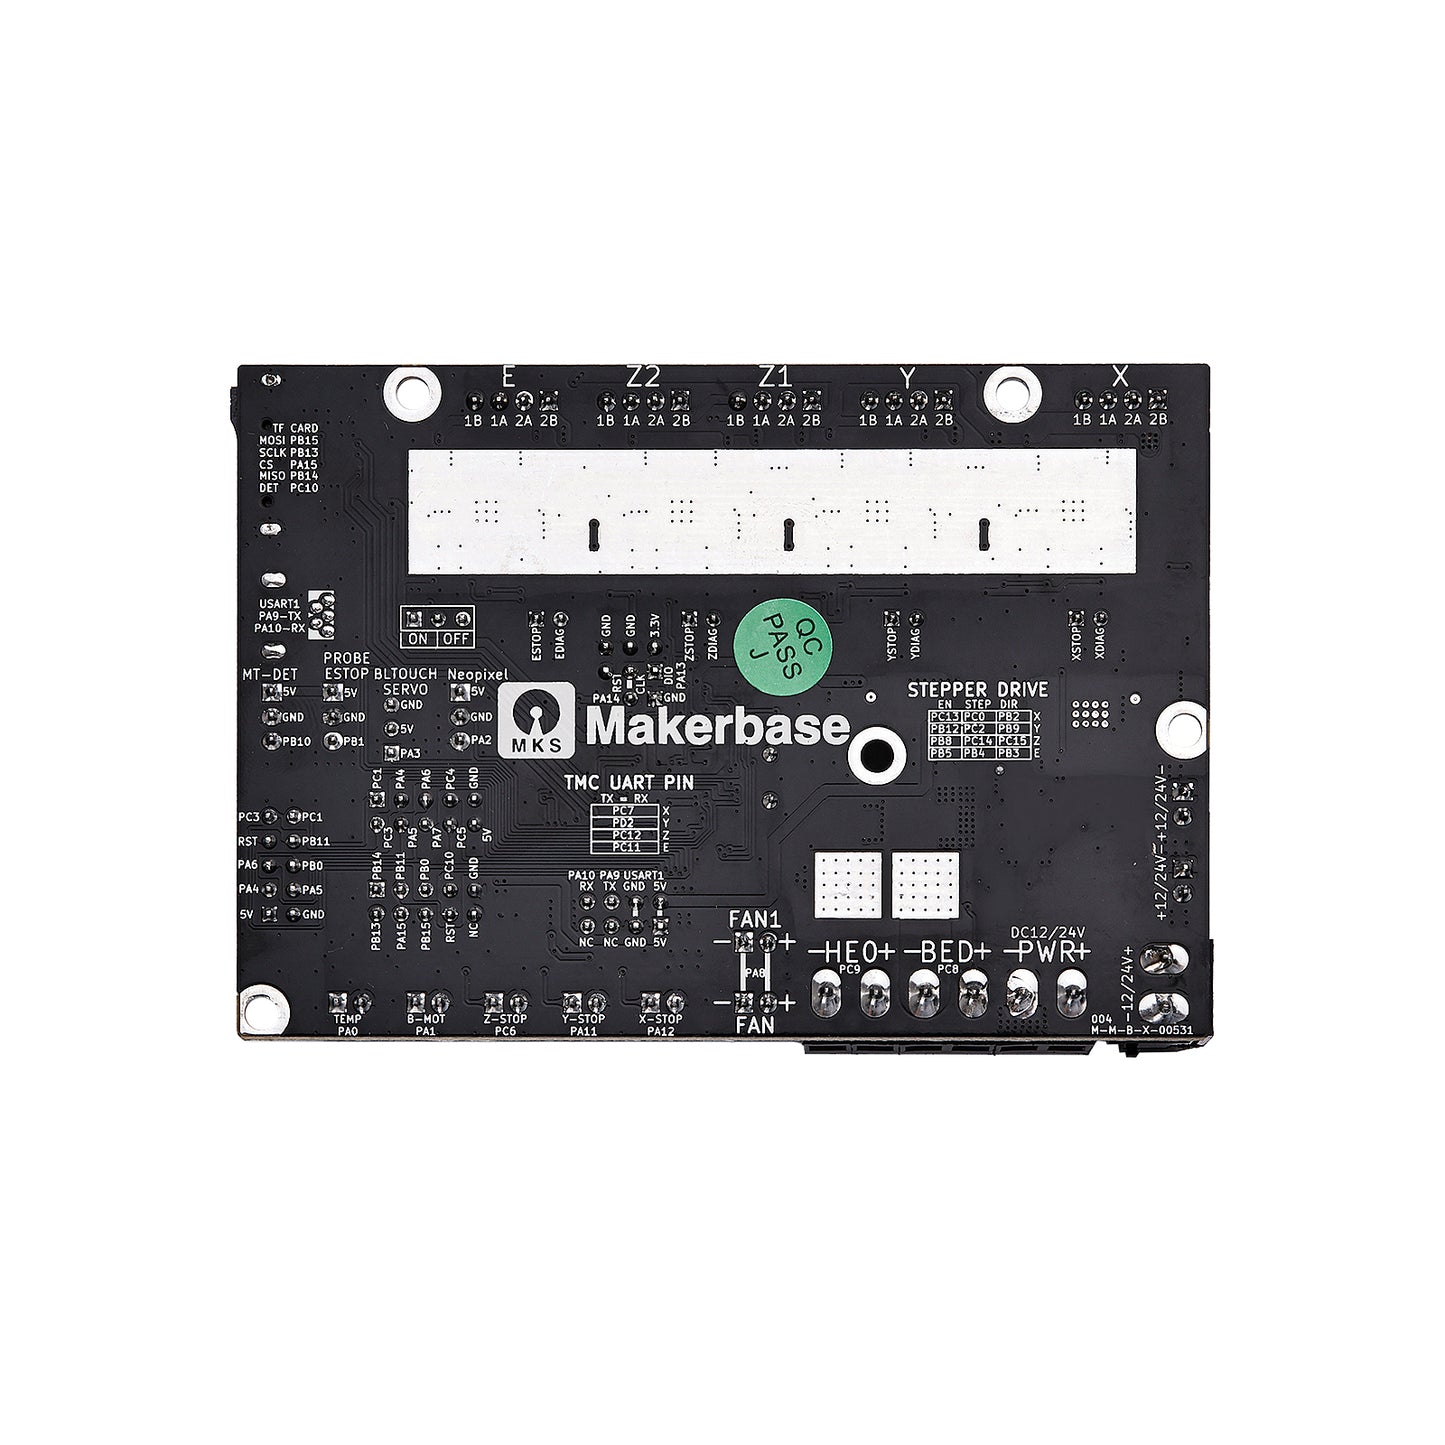 [MKS Robin E3 V1.1]Silent Controller Board integrated 4 TMC2209 Drivers, Replacement board for the Creality Ender-3/5 and CR-10 3D Printers, Voron 0.1 & Klipper